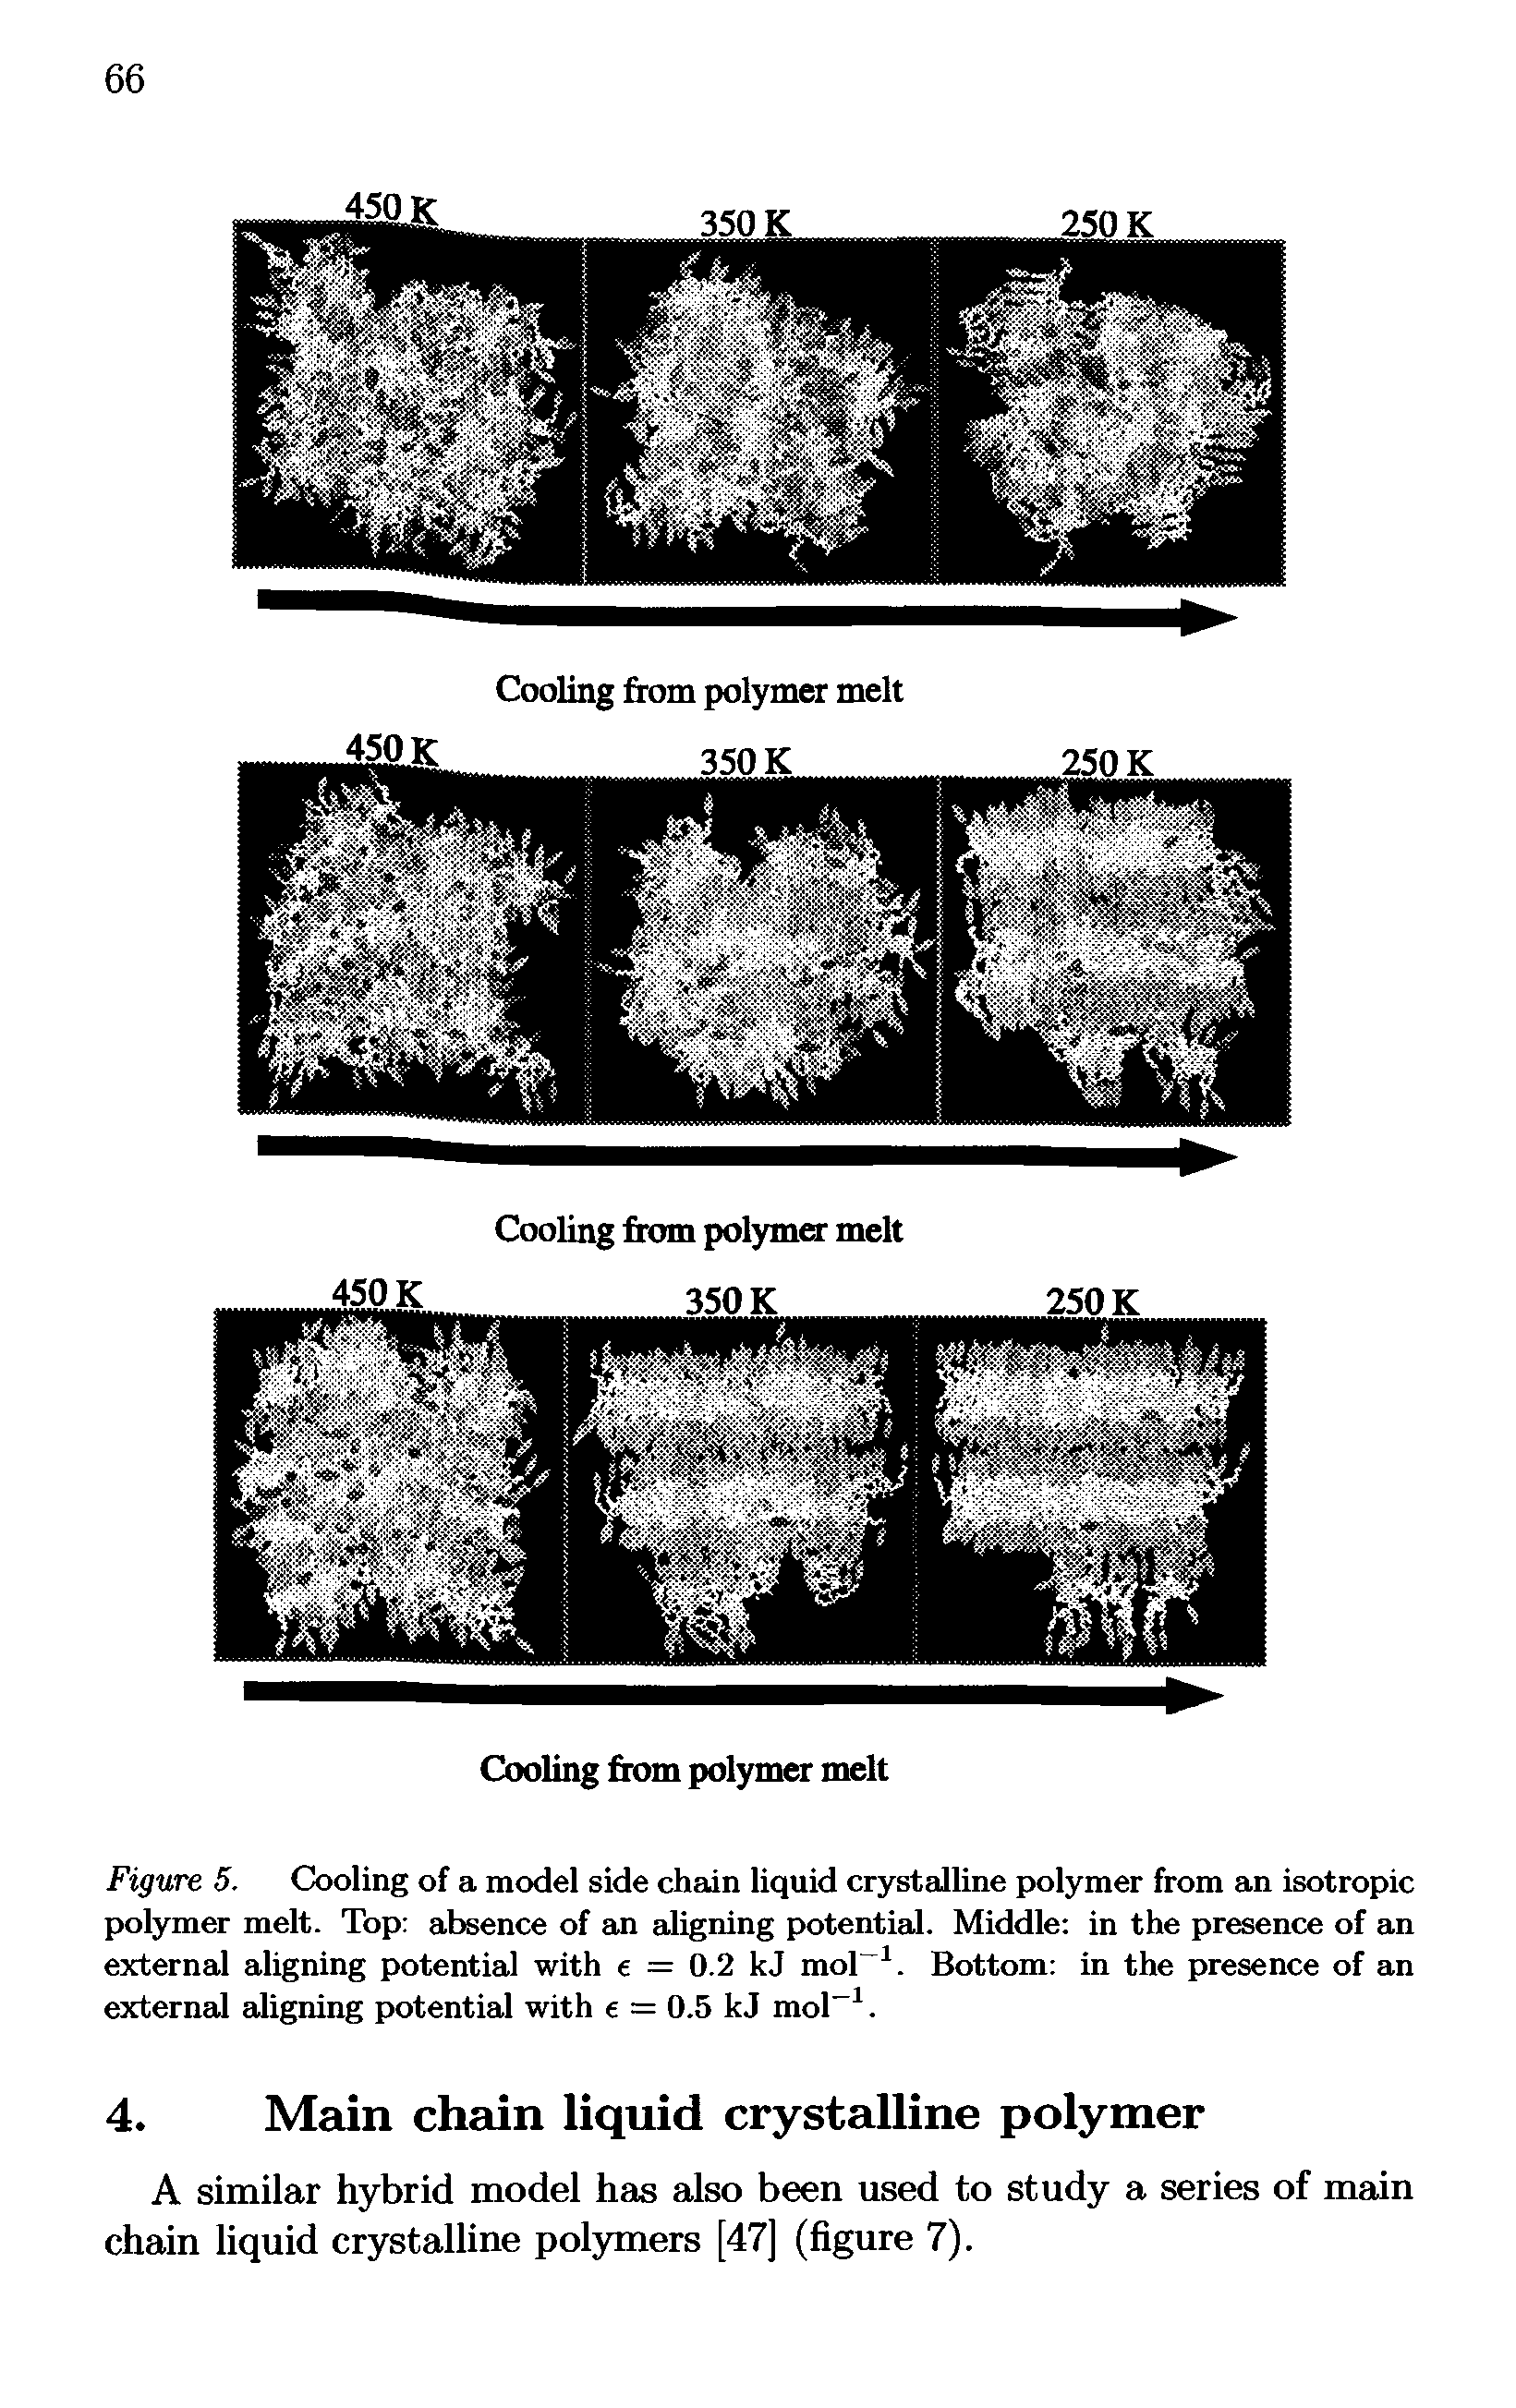 Figure 5. Cooling of a model side chain liquid crystalline polymer from am isotropic polymer melt. Top absence of an aligning p>otentiad. Middle in the presence of an external aligning potential with = 0.2 kJ mol . Bottom in the presence of an externad aligning potentiaJ with e = 0.5 kJ mol. ...